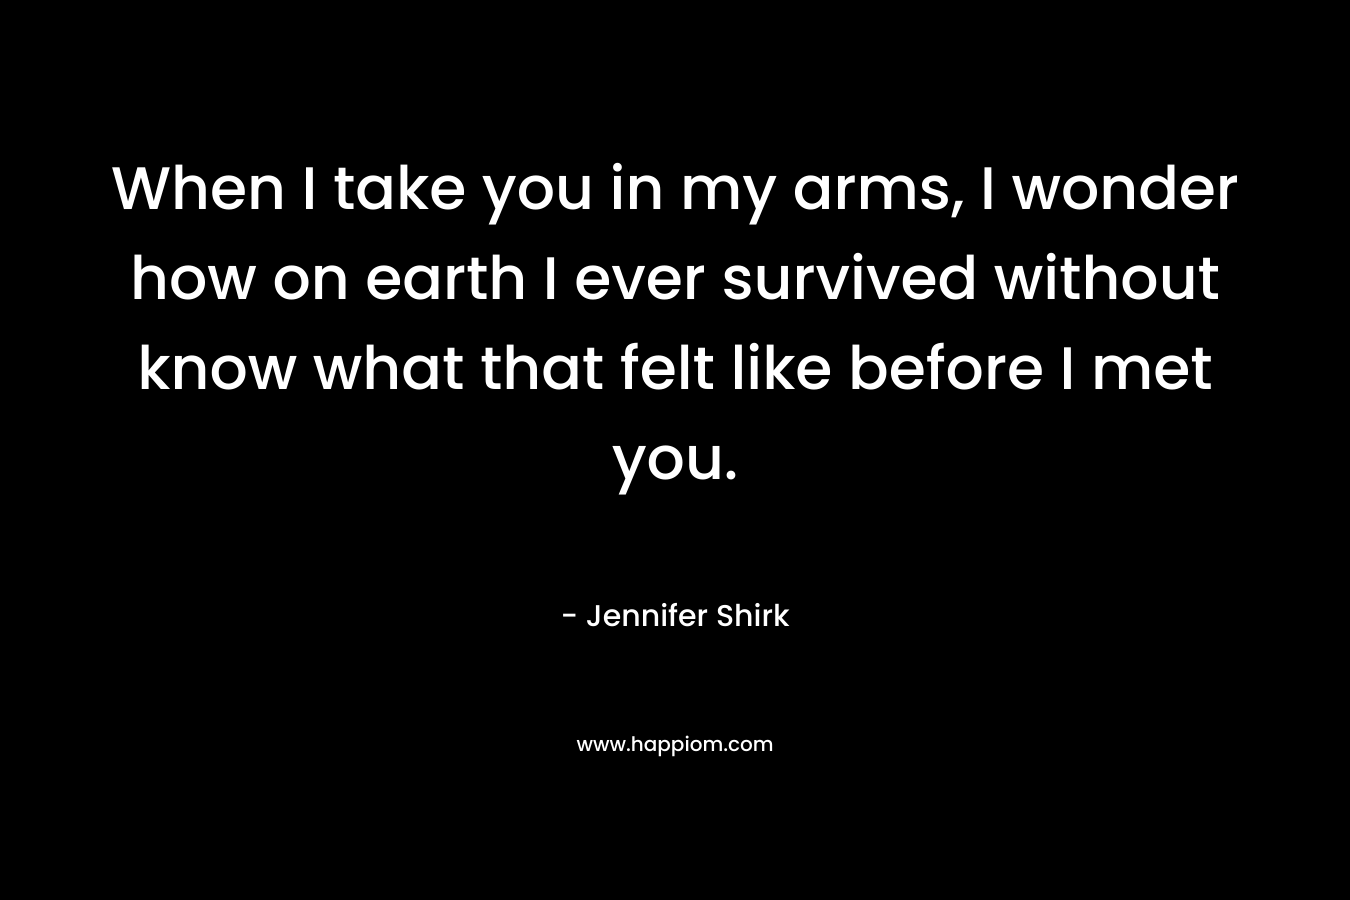 When I take you in my arms, I wonder how on earth I ever survived without know what that felt like before I met you. – Jennifer Shirk